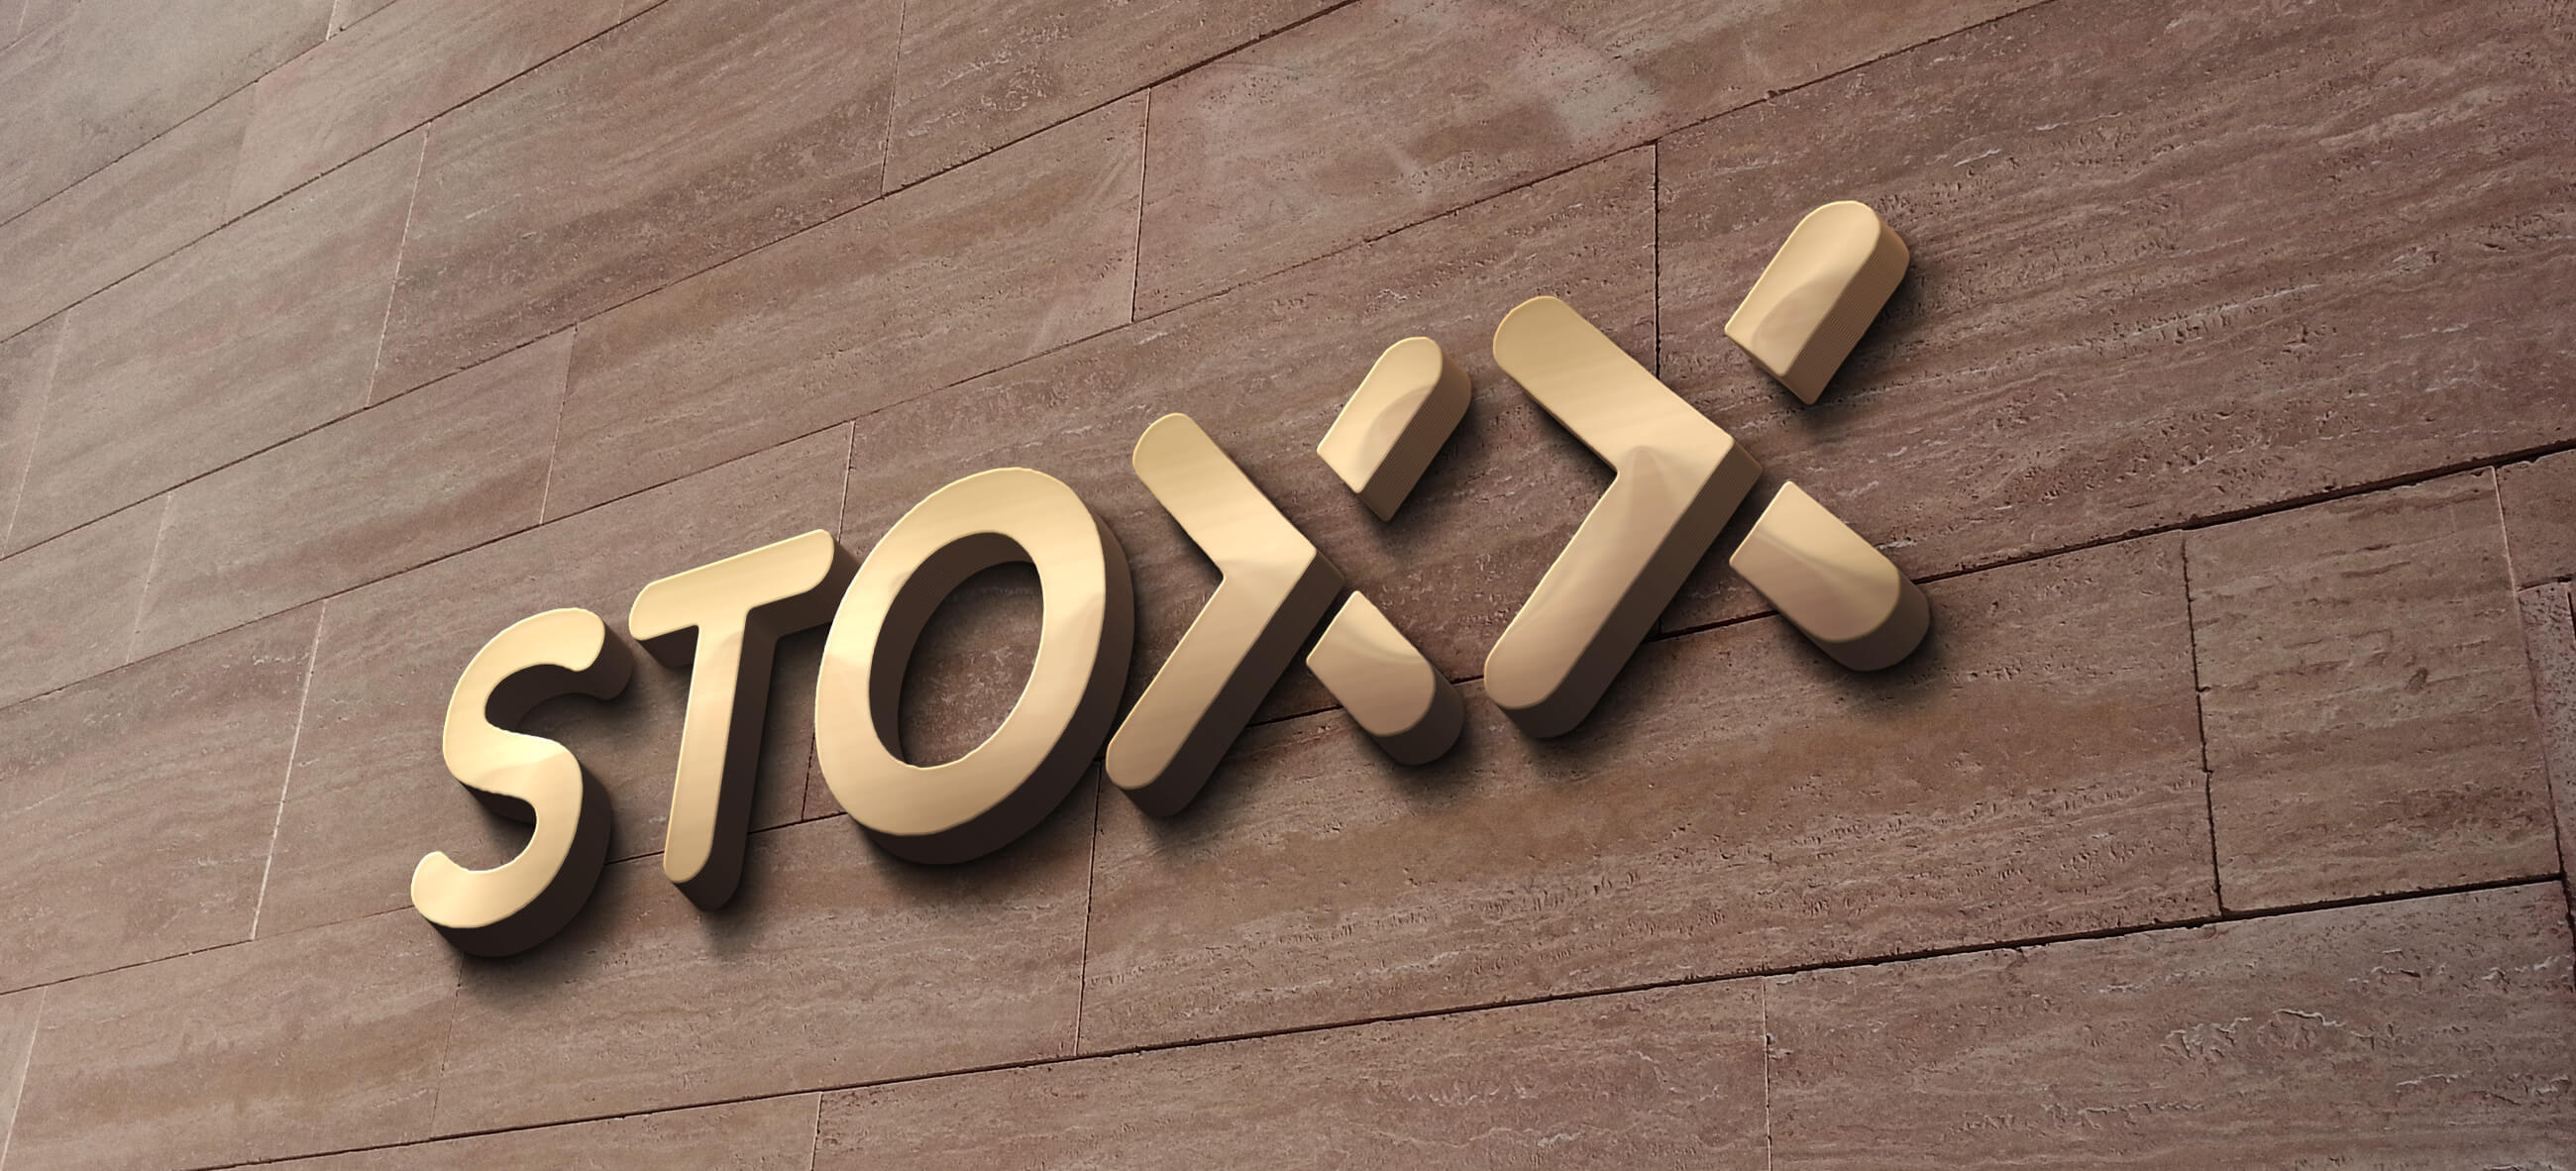 STOXX Limited Taps Christian Kronseder as Zurich-Based COO